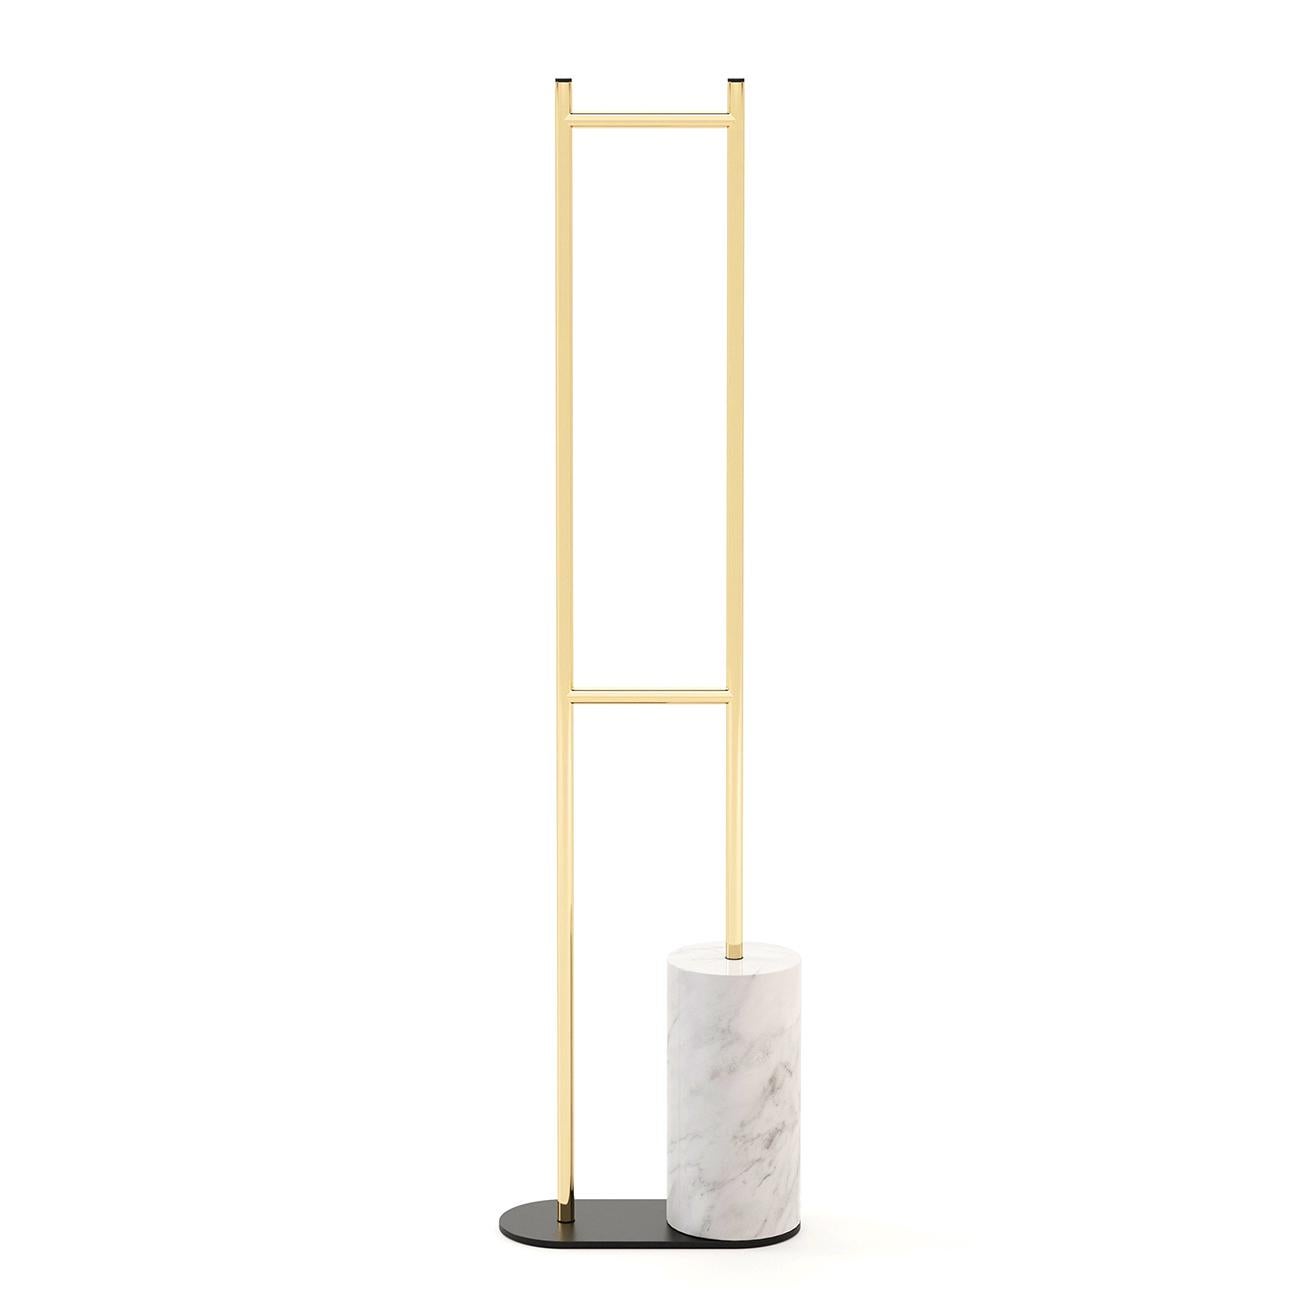 Mike Coatrack with white polished carved marble base
and with blackened metal plate base. With polished stainless
steel coatracks in gold finish.
Also available with black marble or emperador dark marble,
on request, also available with other